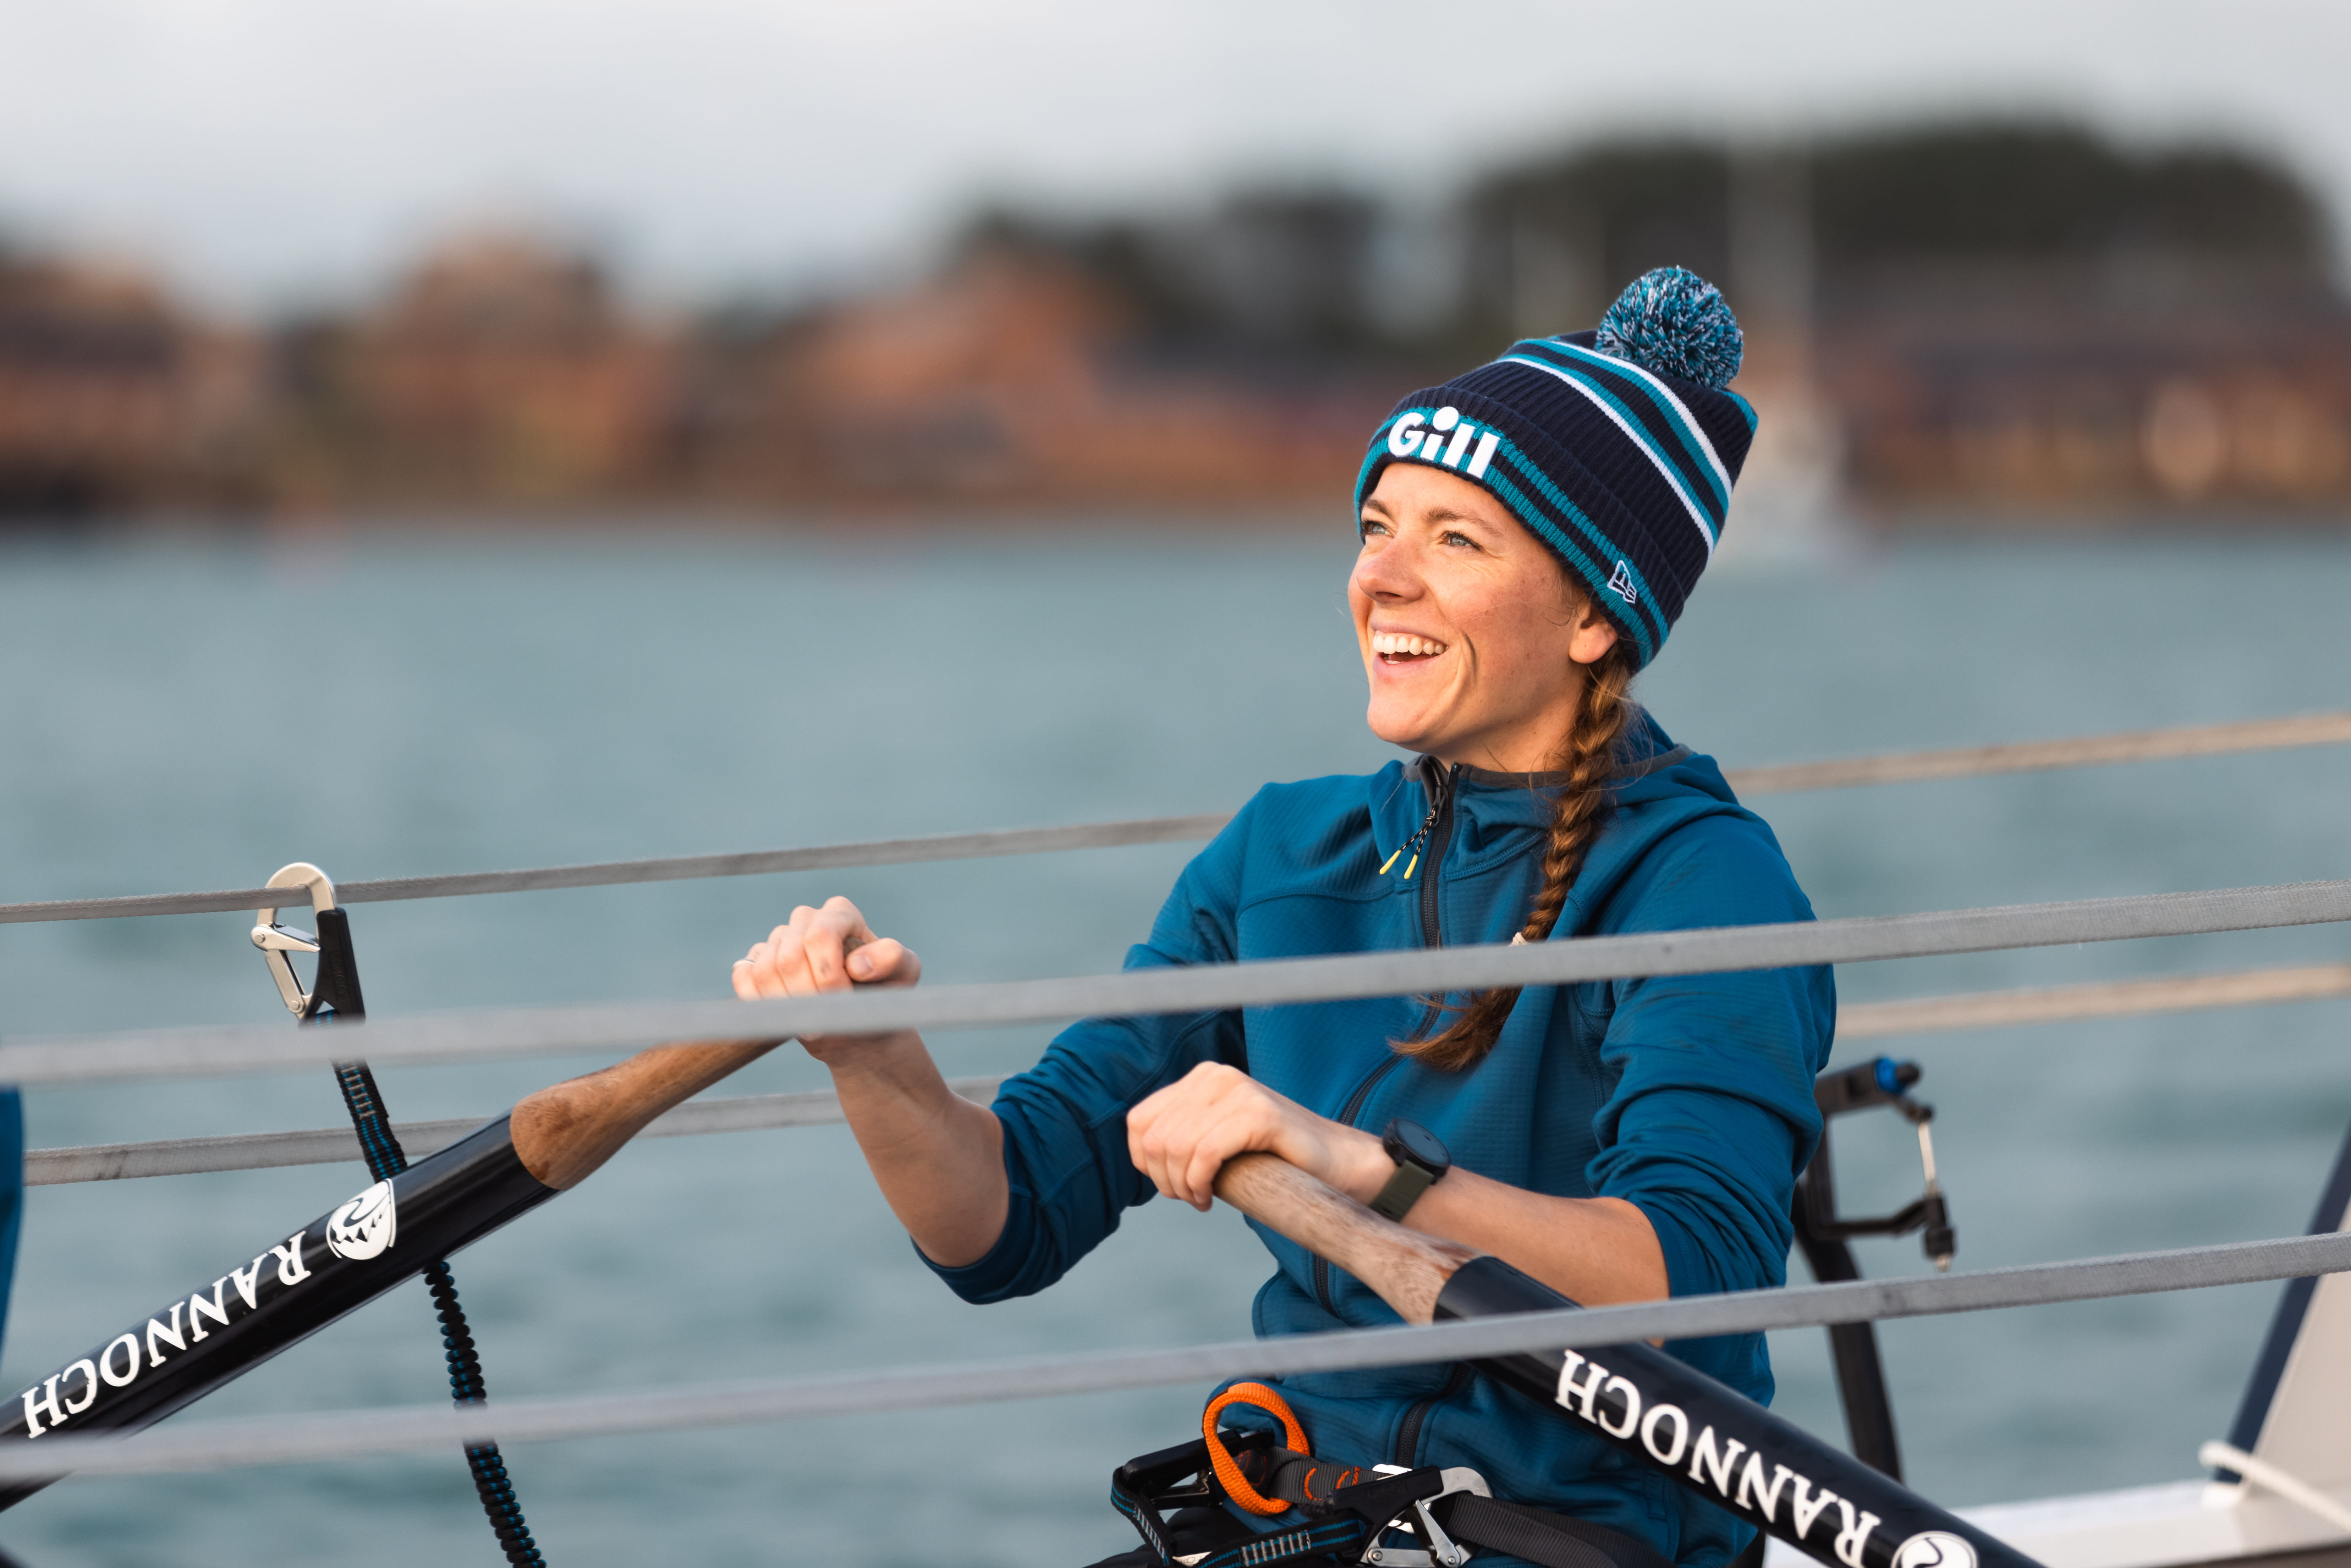 Female rower in a blue top and hat